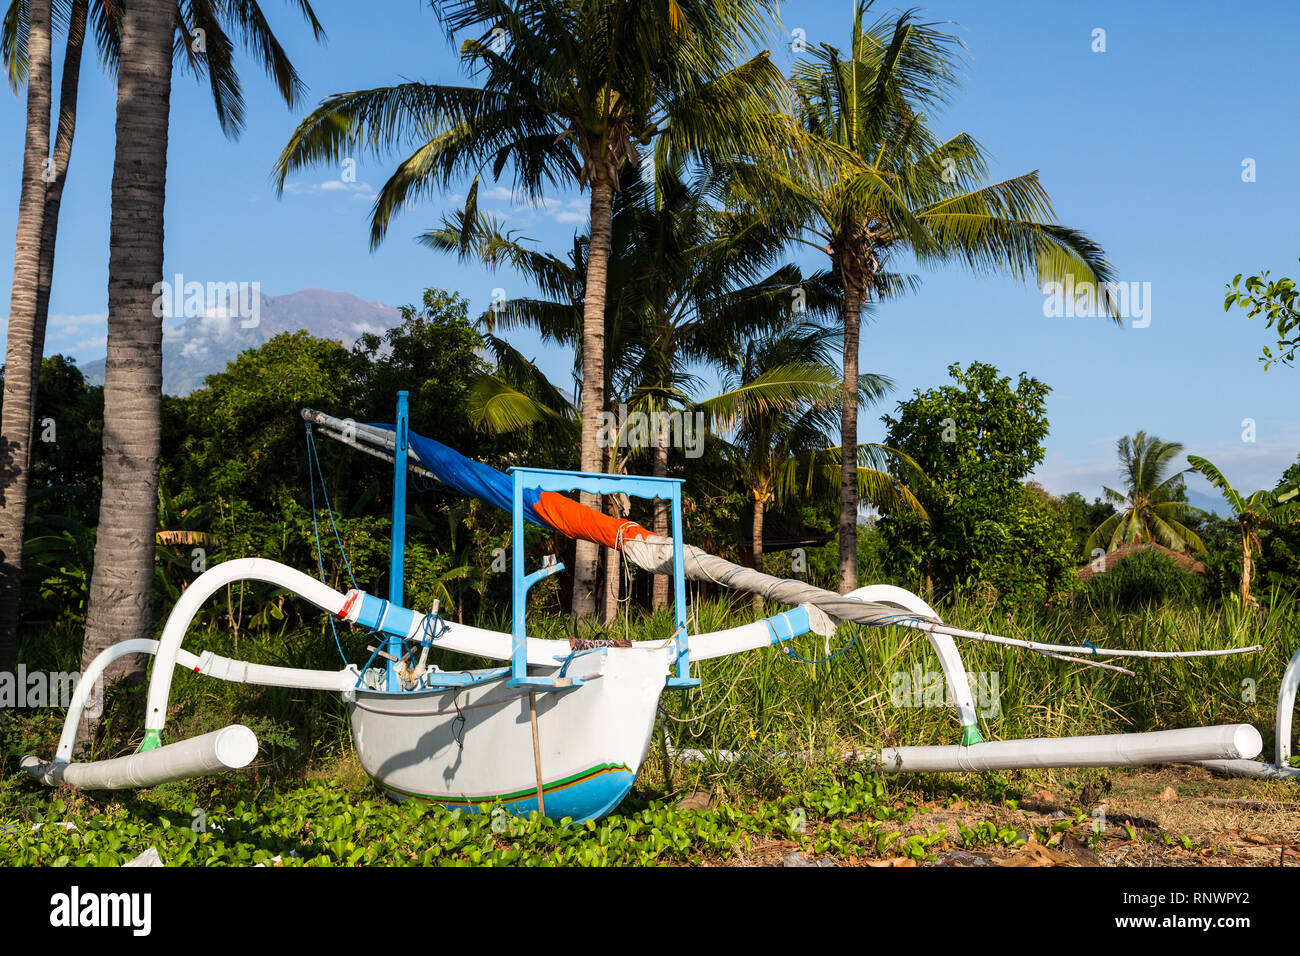 A colorful jukung boat rests on the sand in Bali, Indonesia. Stock Photo